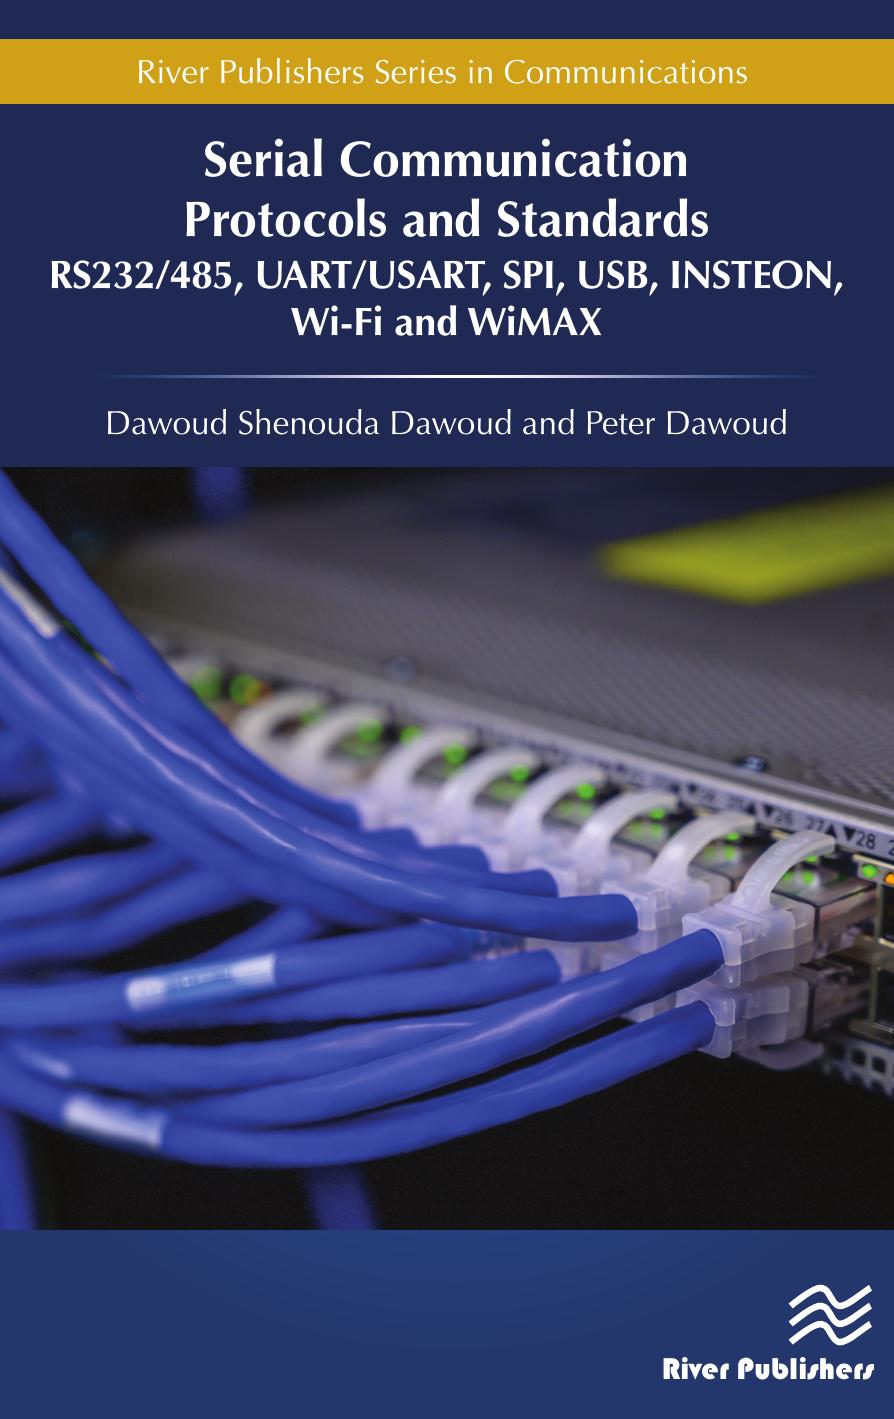 Serial Communication Protocols and Standards (River Publishers Series in Communications) by Dawoud Shenouda Dawoud Peter Dawoud